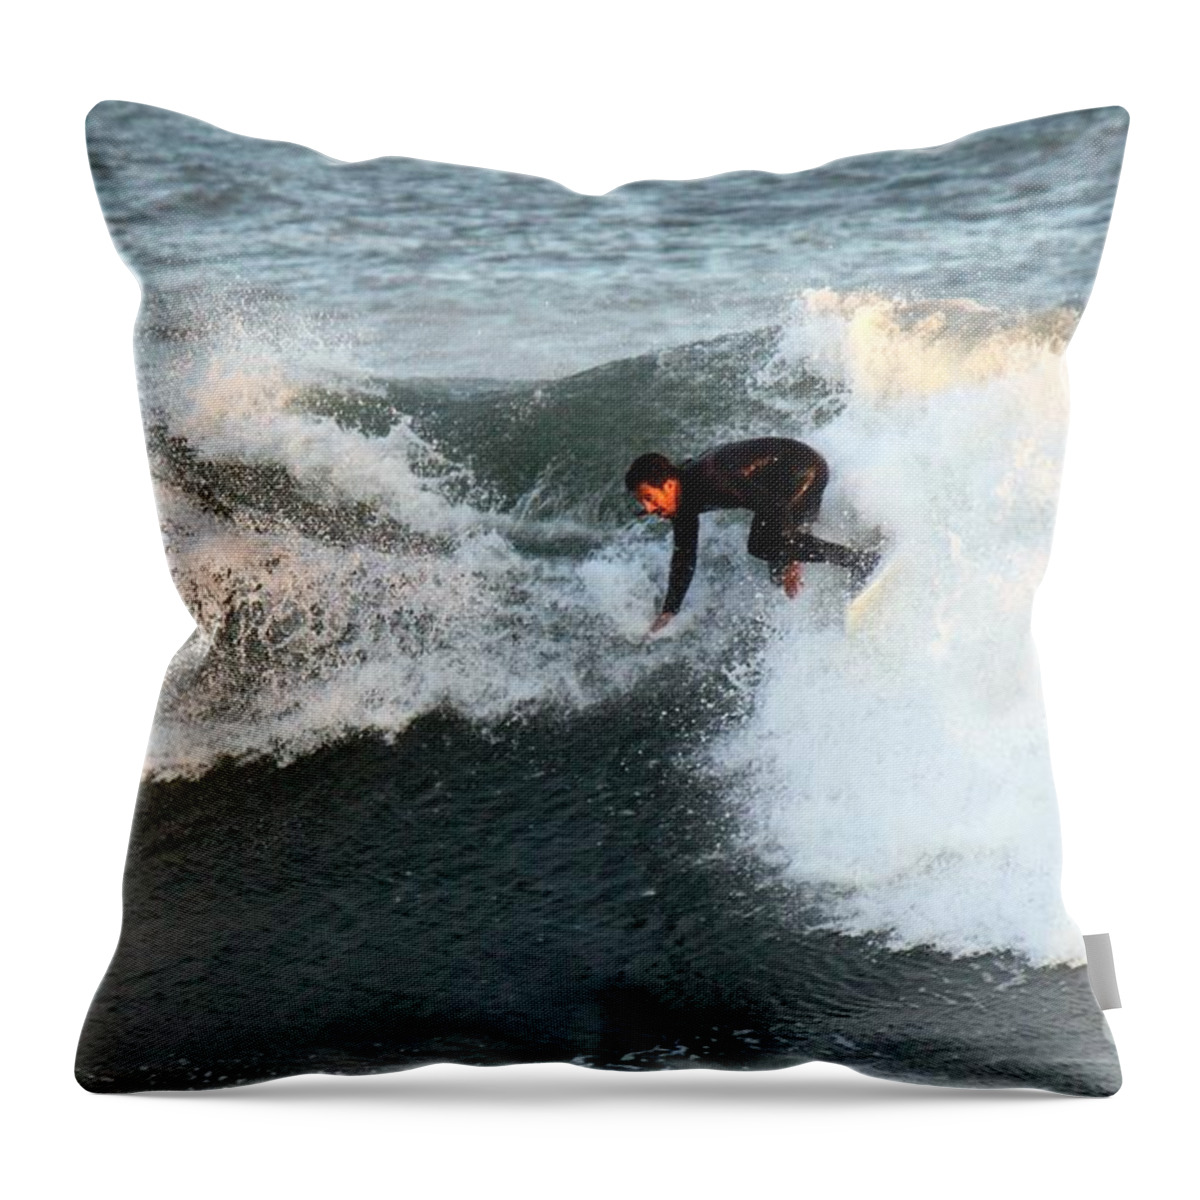 Surfing Throw Pillow featuring the photograph Action images #3 by Donn Ingemie